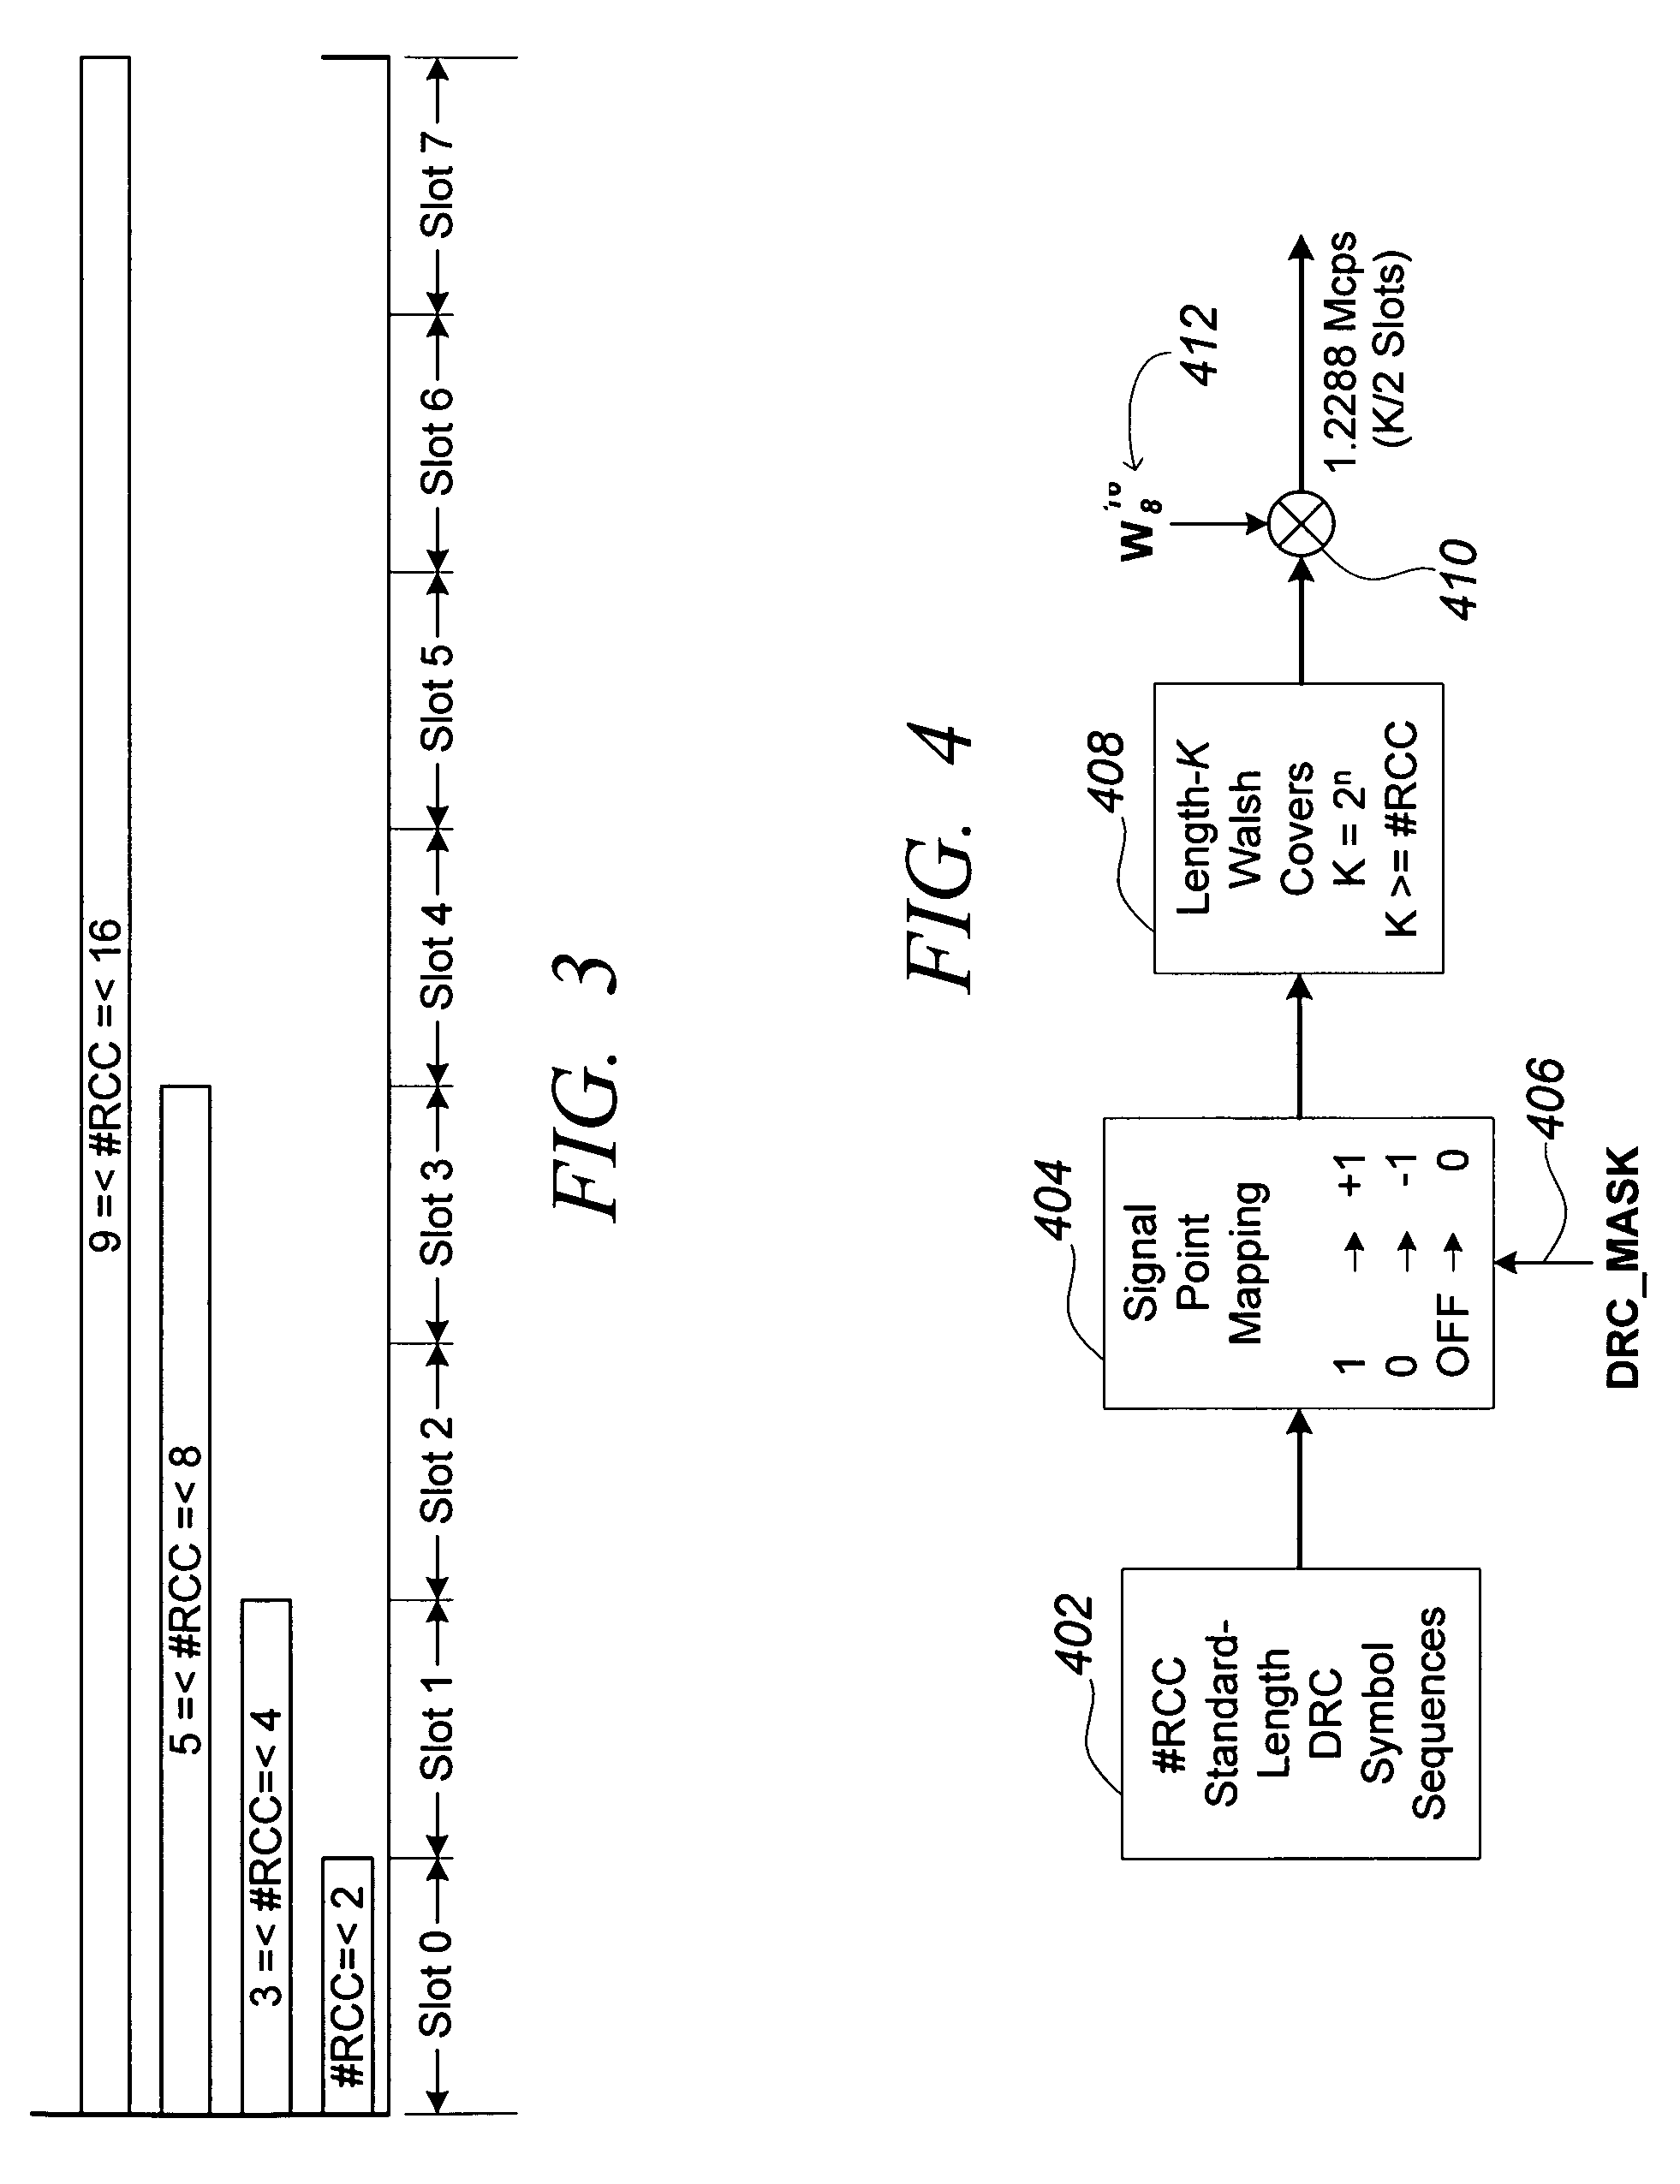 Reverse-link structure for a multi-carrier communication system